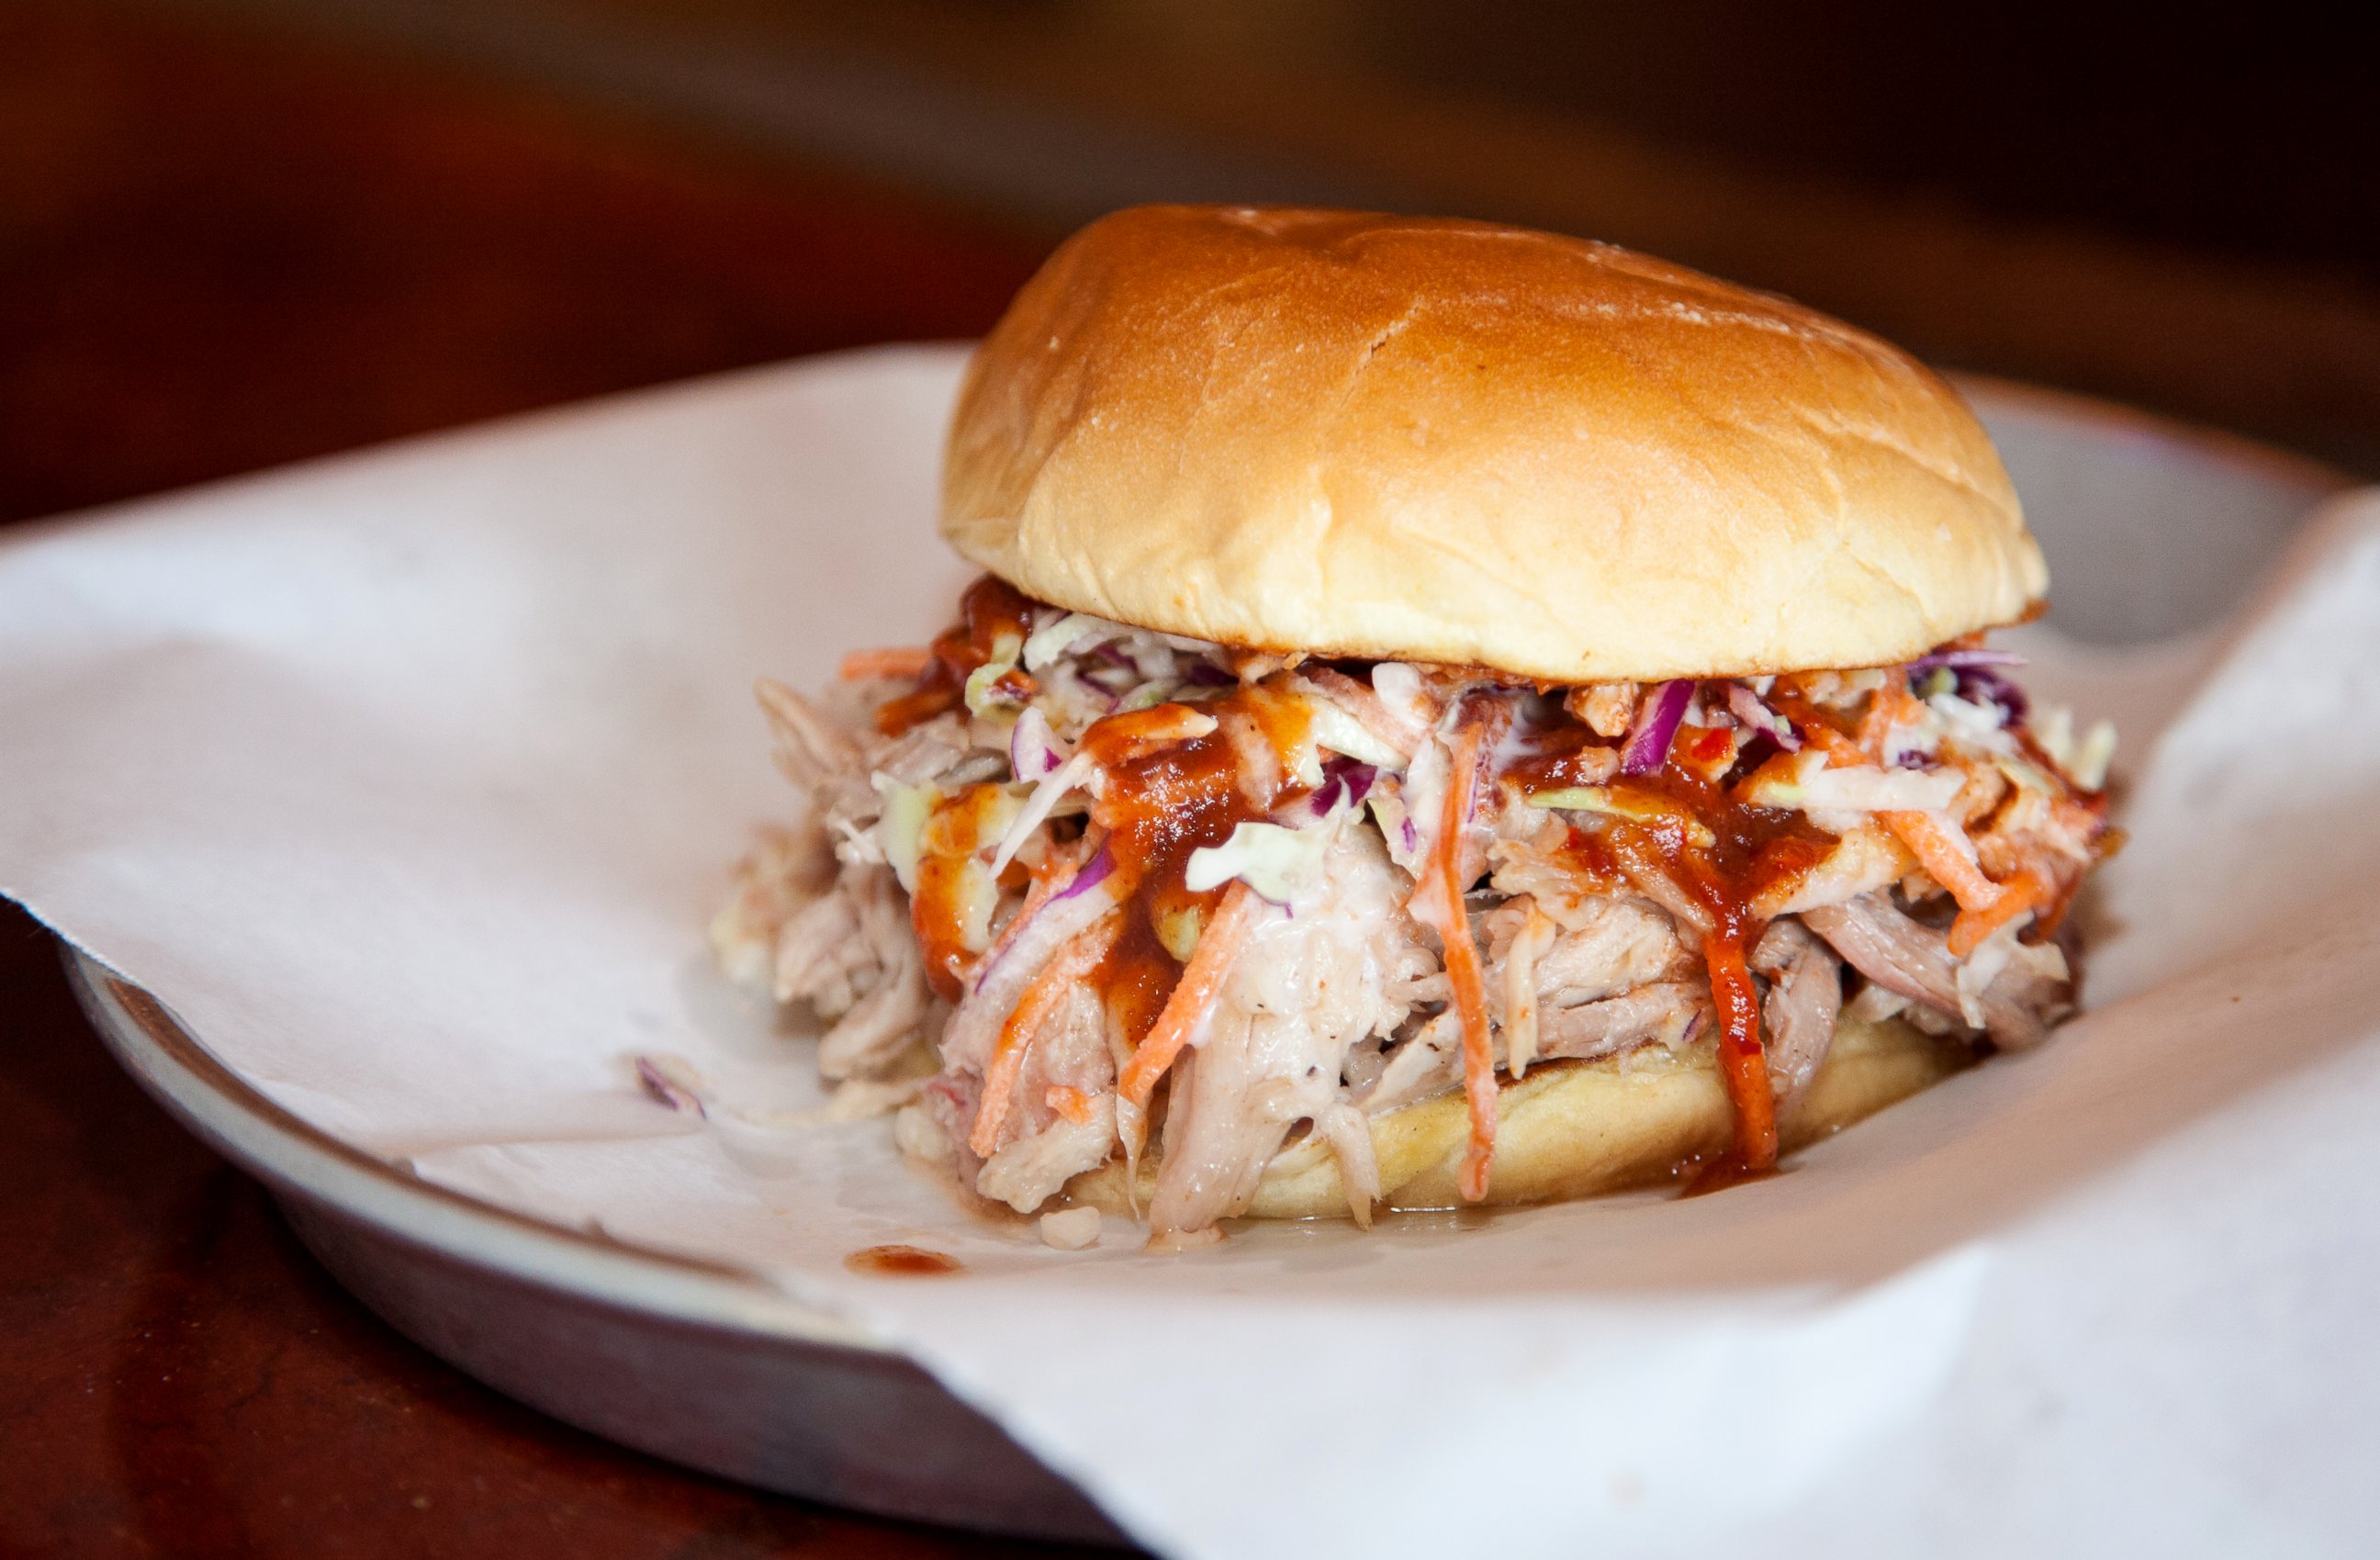 PHOTO: The barbecued pig is turned into a pulled pork sandwich with barbecue sauce and cole slaw on a roll.